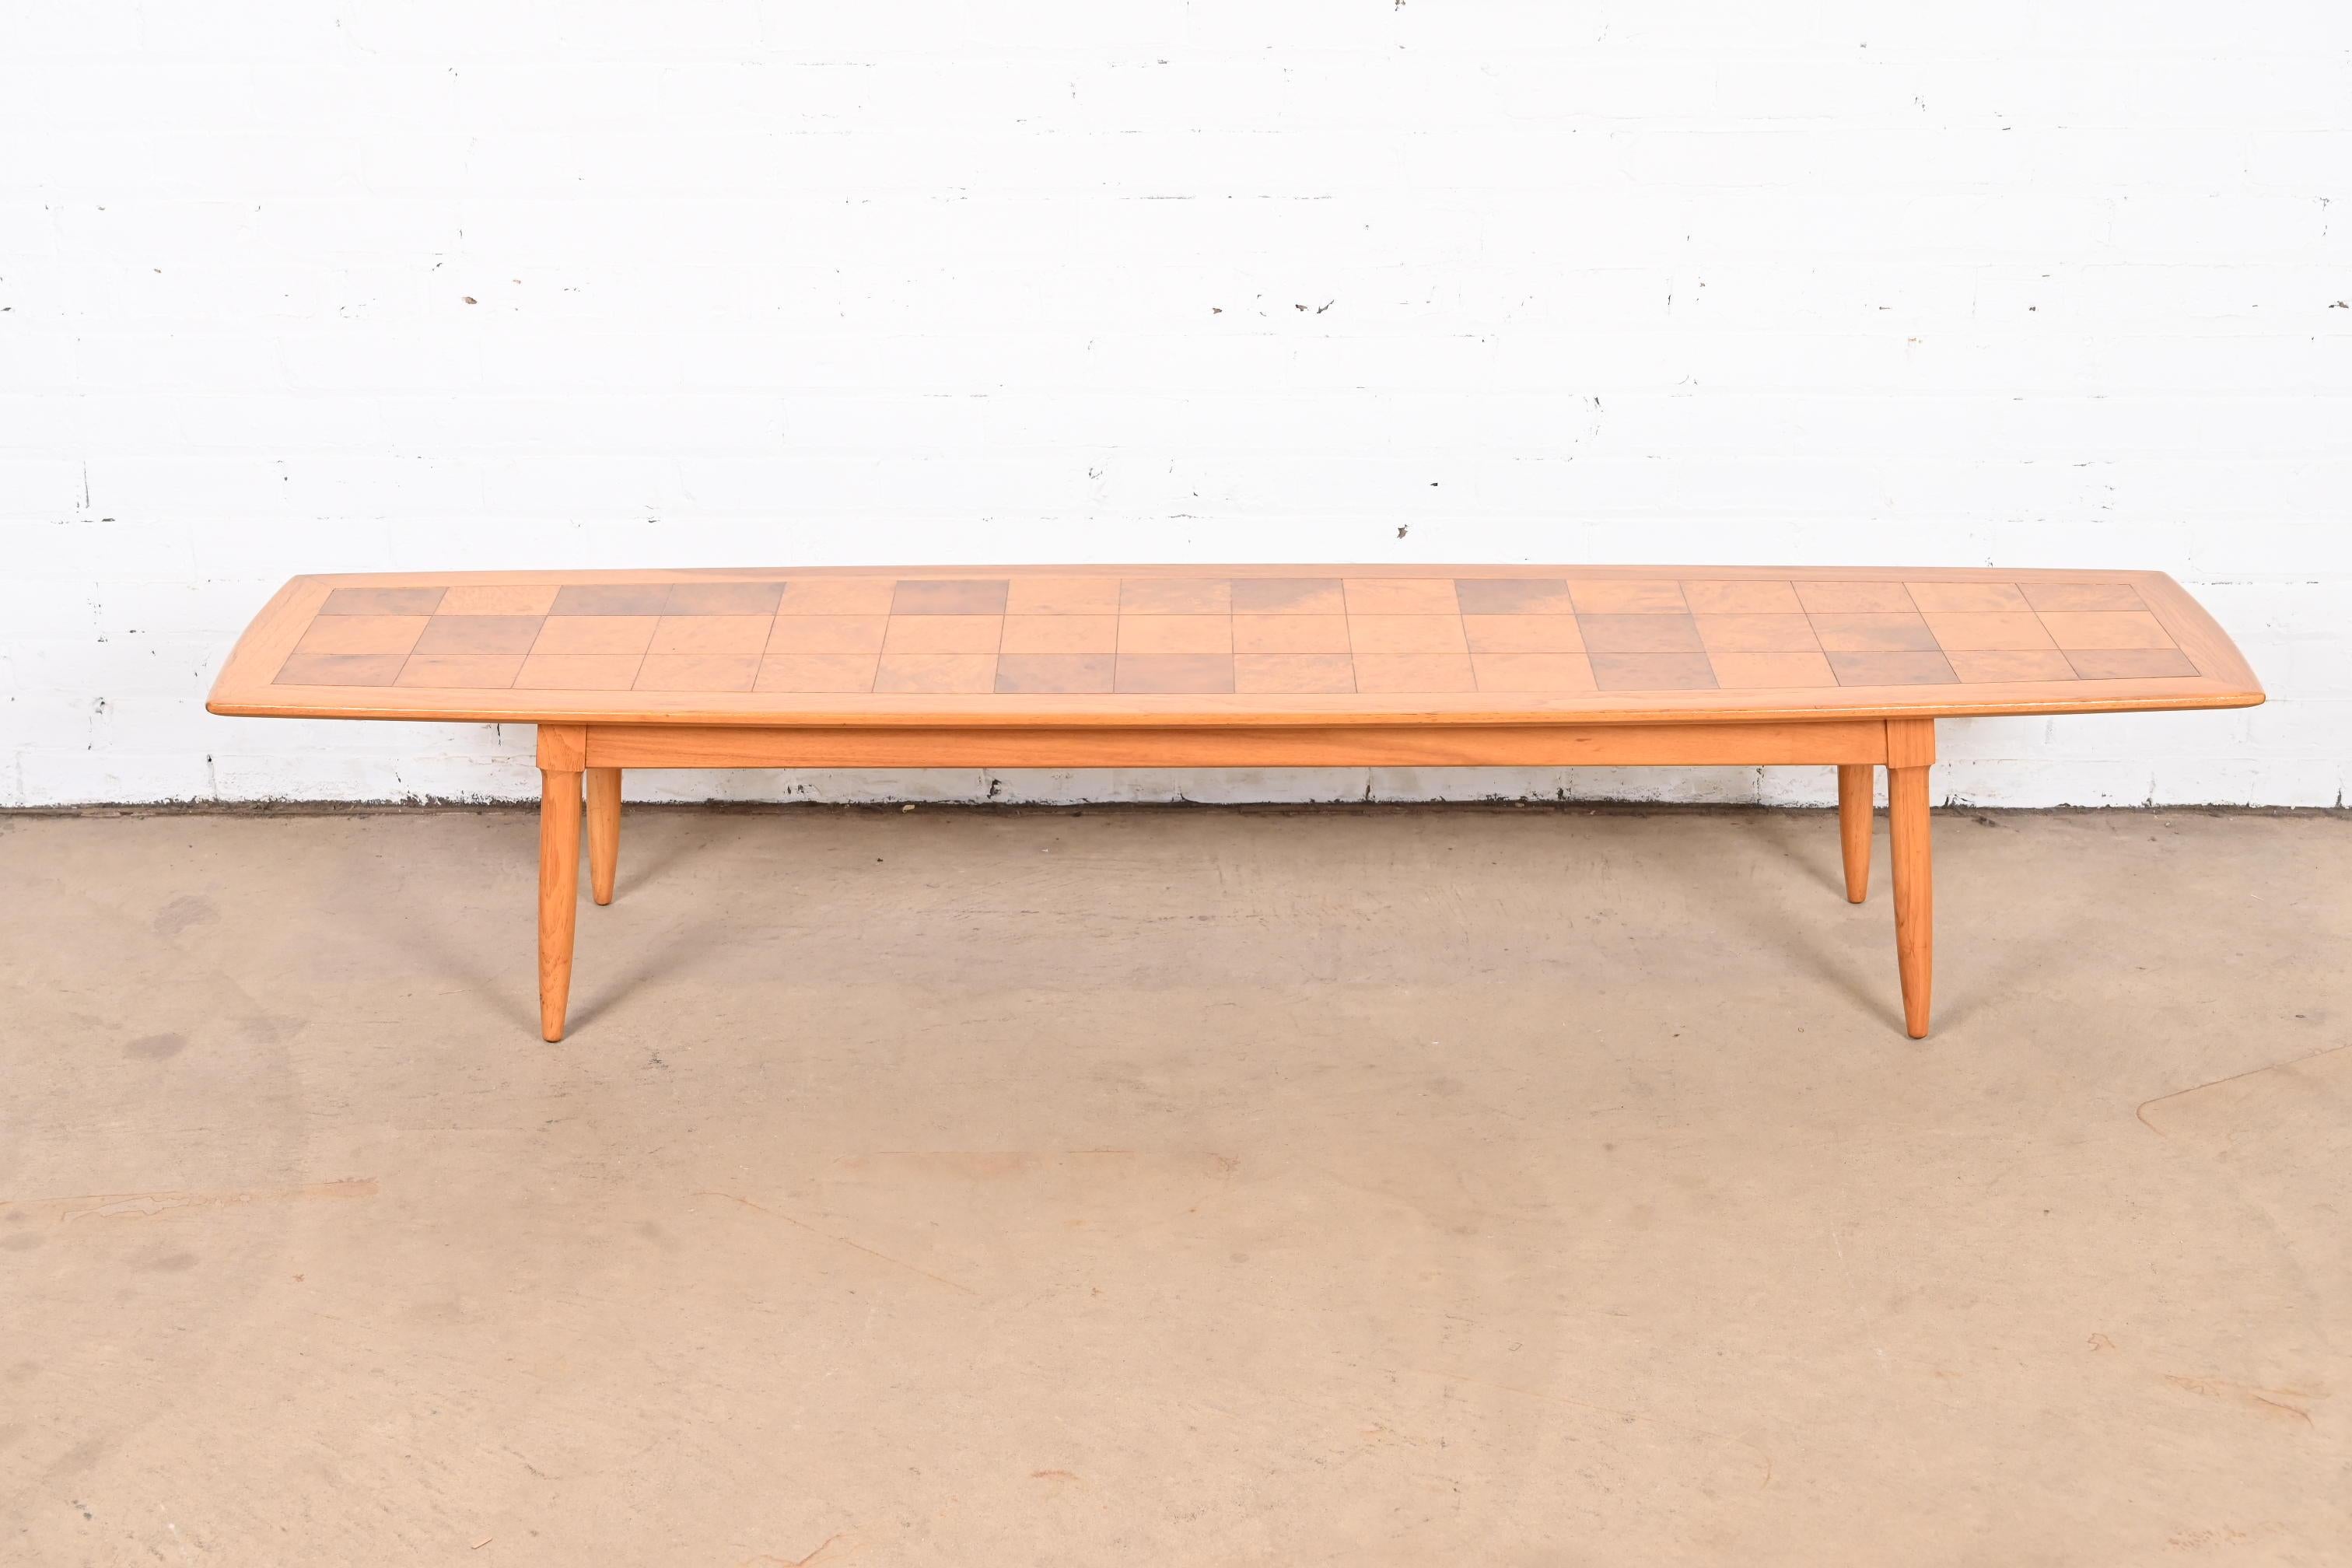 A sleek and stylish Mid-Century Modern extra long surfboard coffee table

By Tomlinson, 